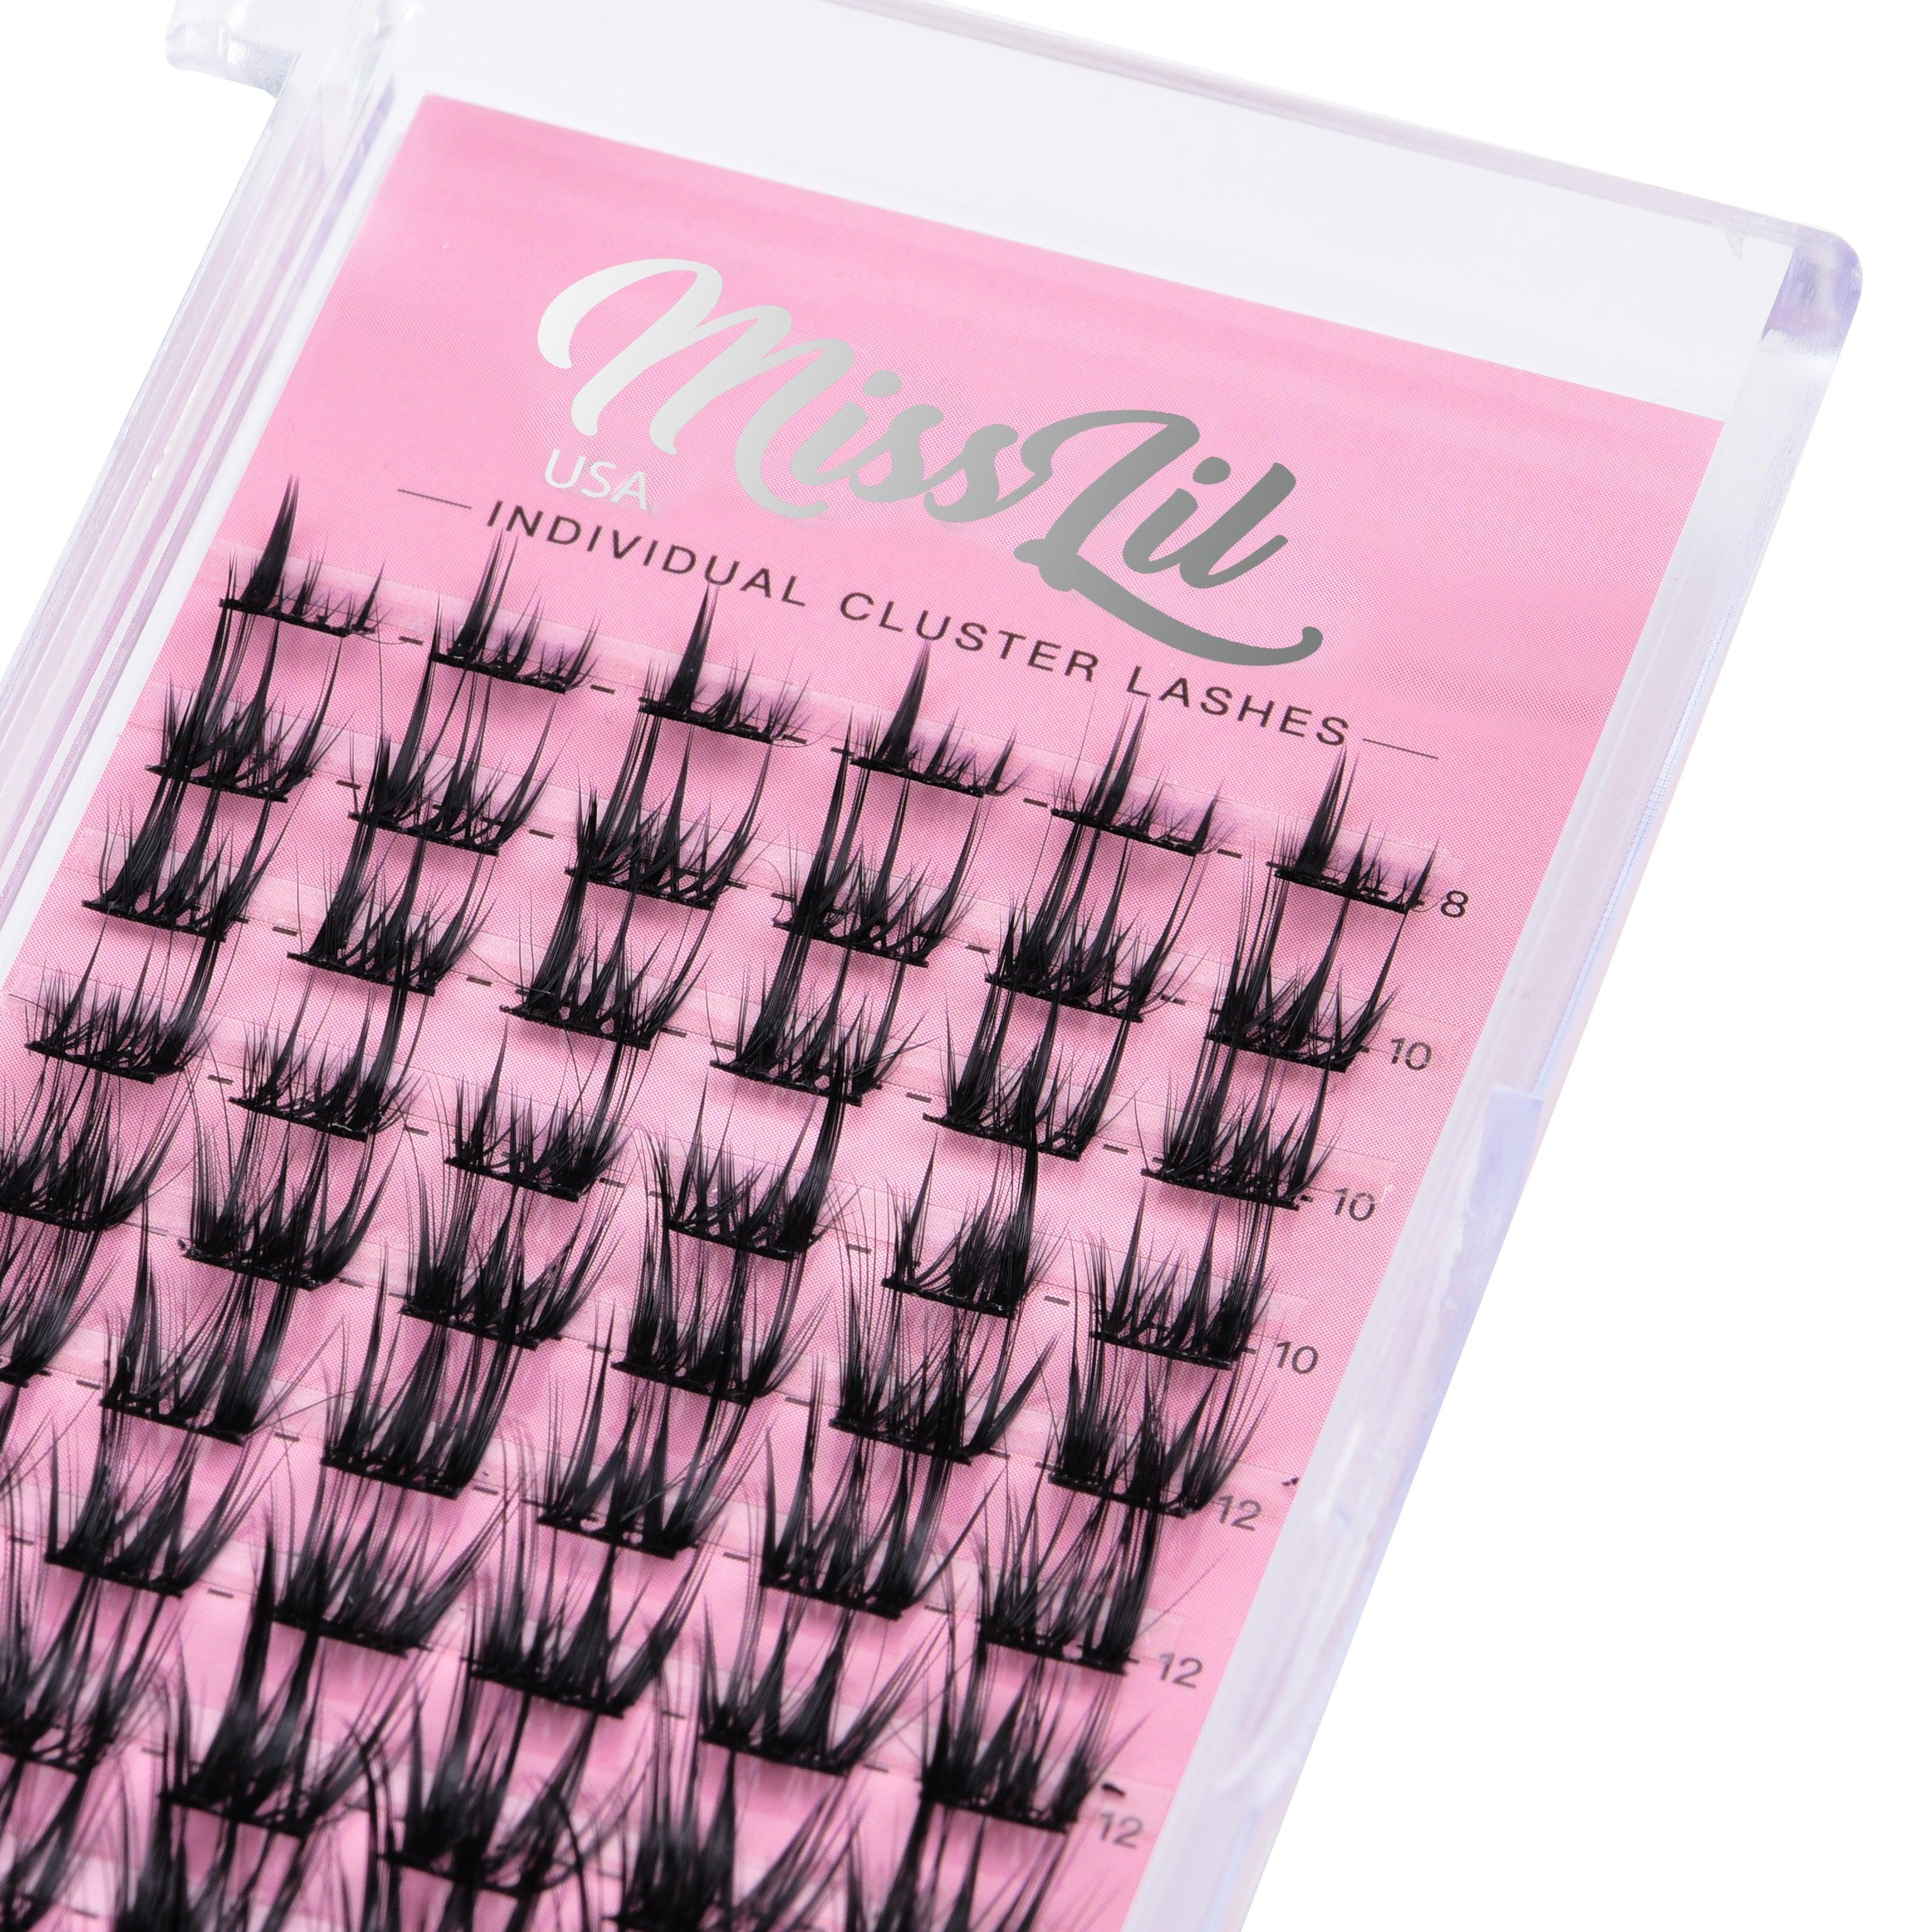 Individual Cluster Lashes AD-57  Small Mixed Trays - Miss Lil USA